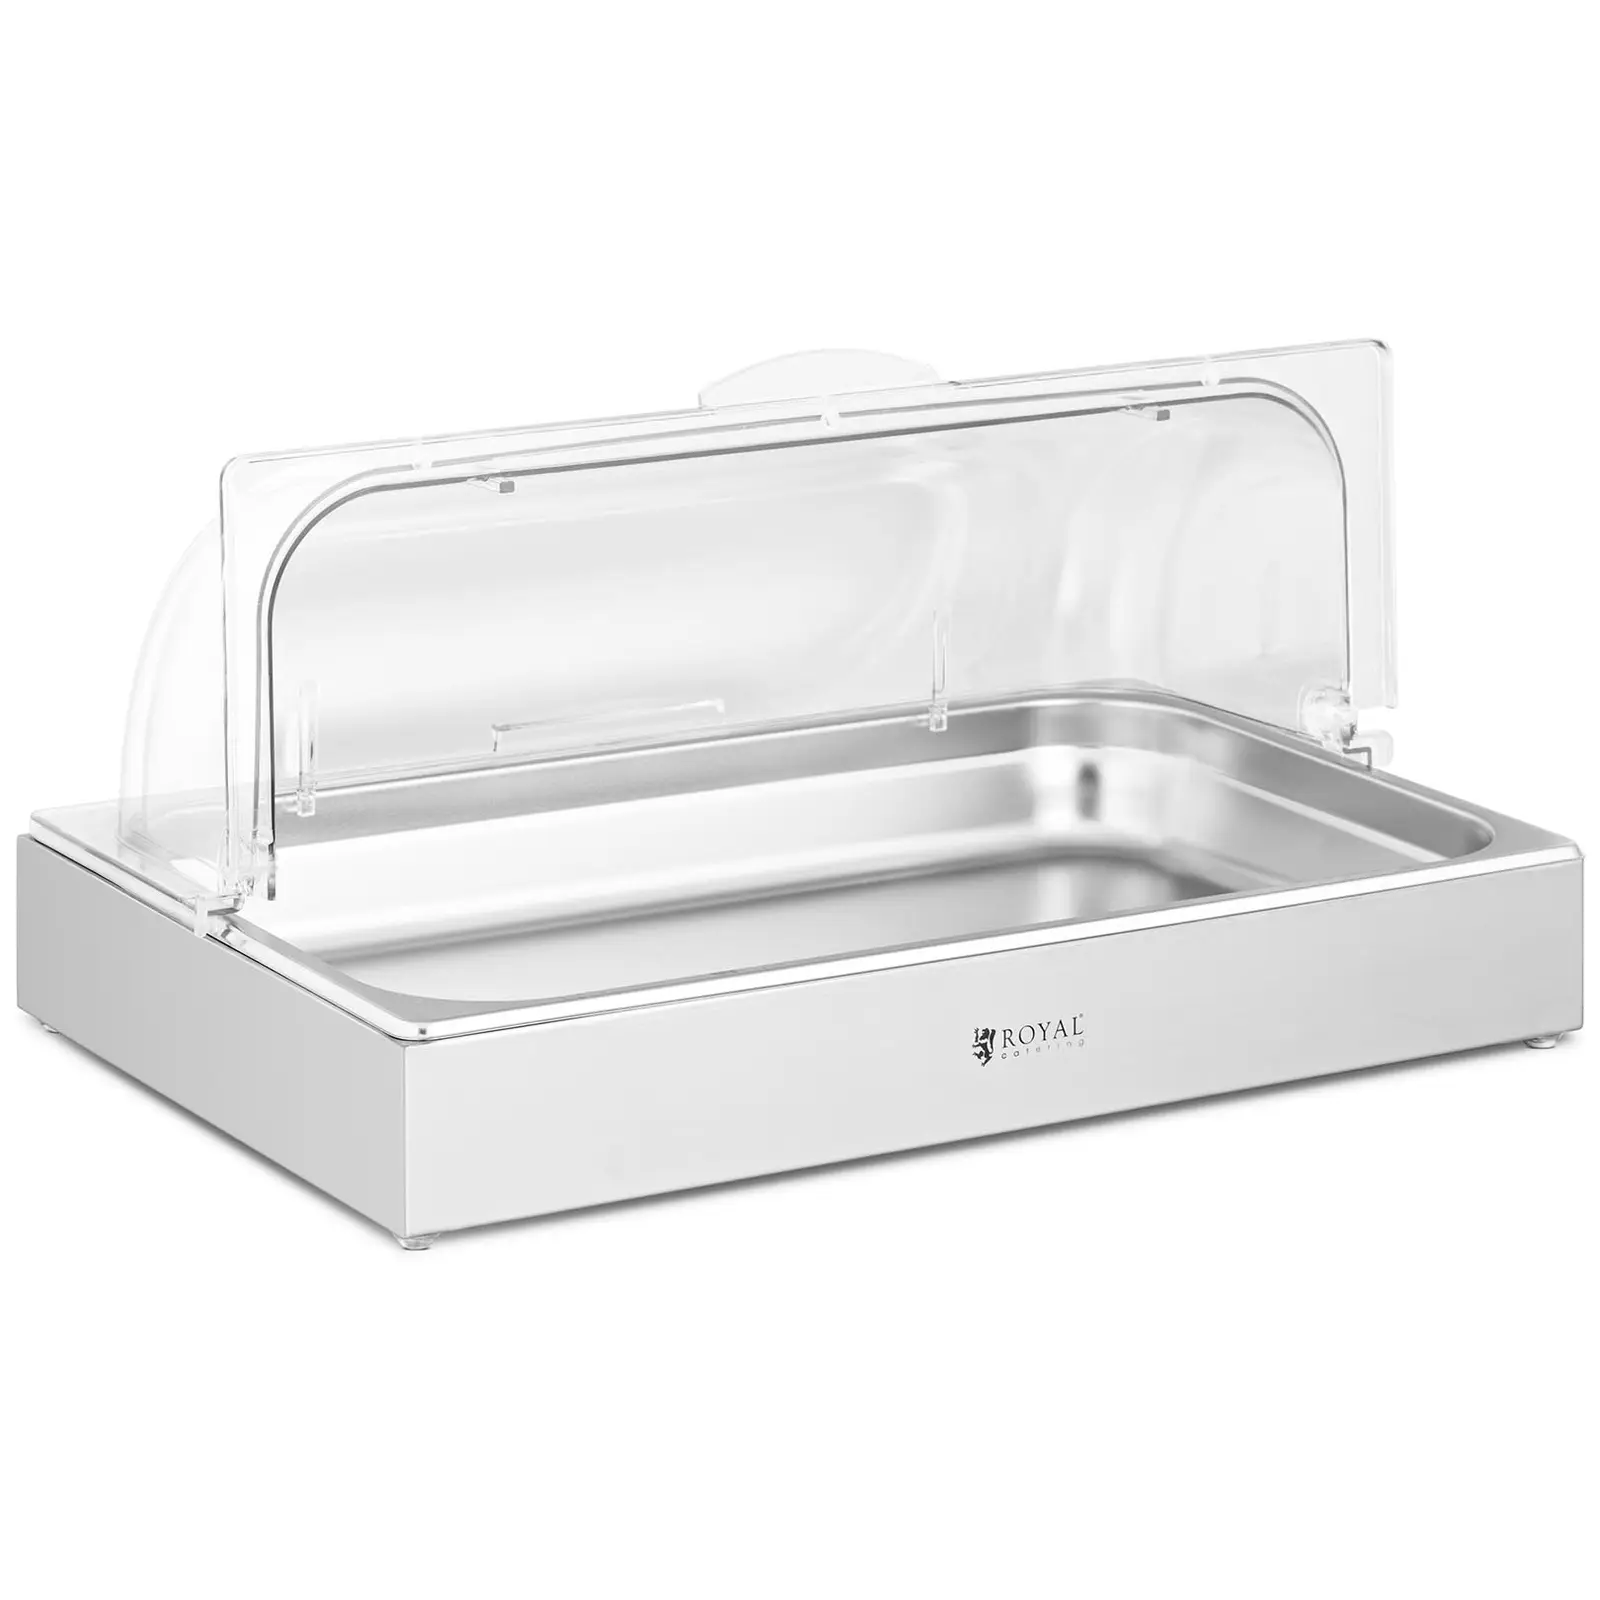 Buffet Display Case- GN 1/1 - stainless steel with hood - Royal Catering